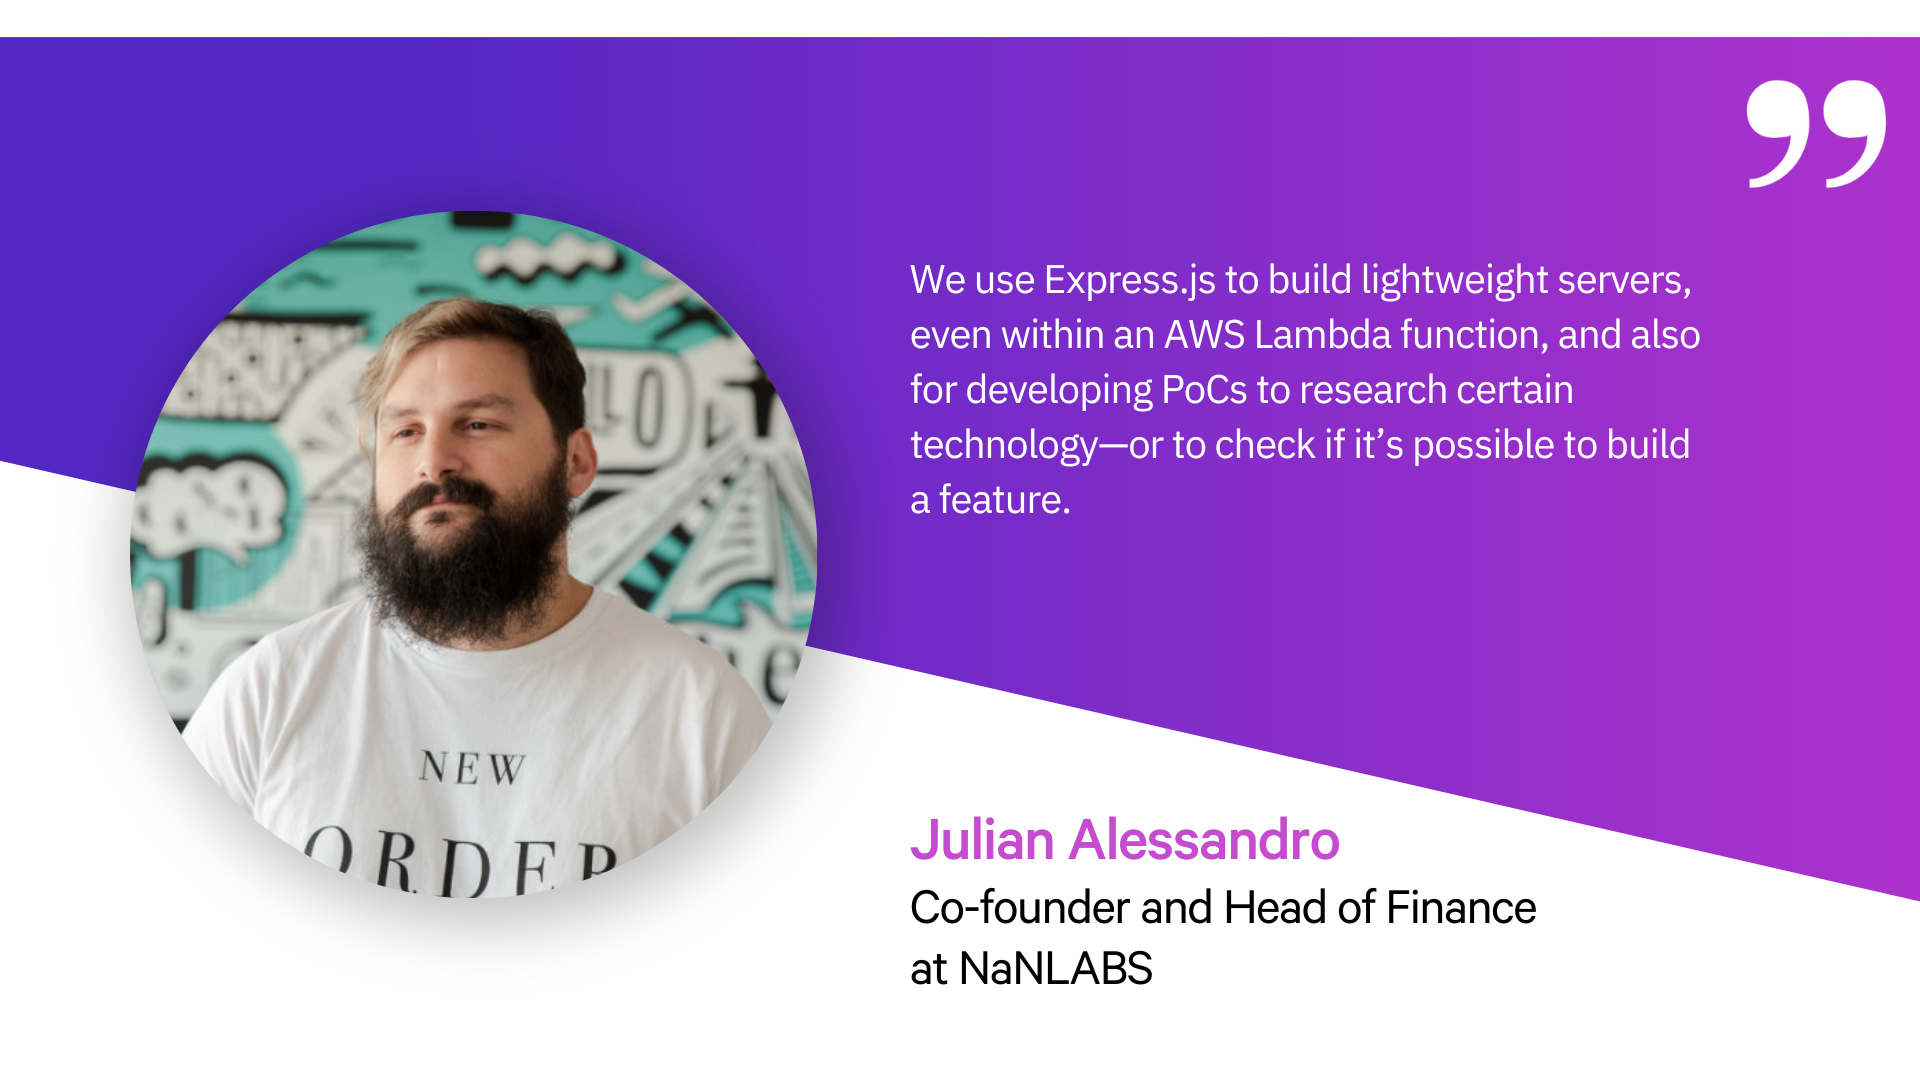 Quote by NaNLABS co-founder on Express.js Node.js web framework